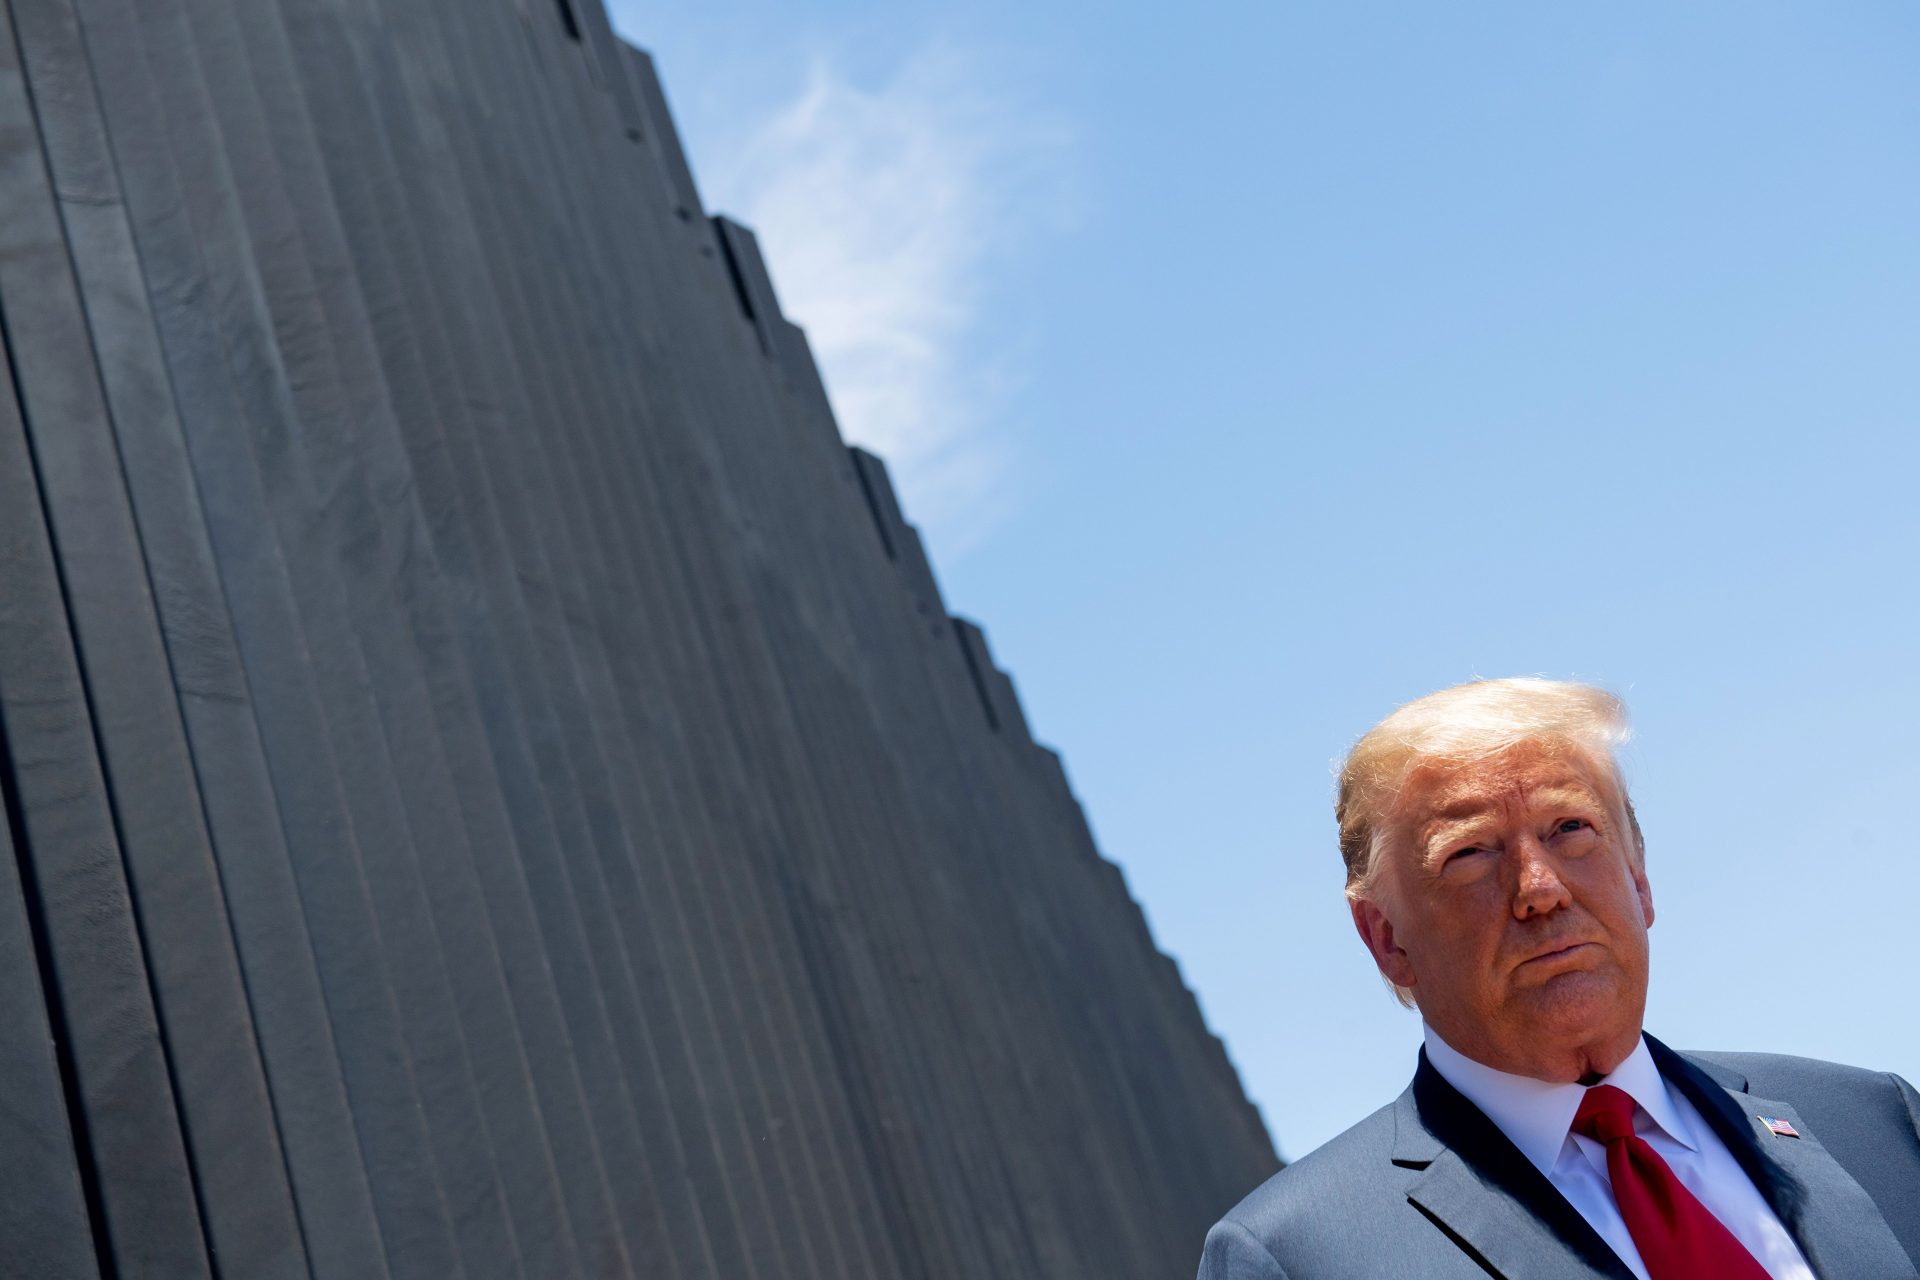 Trump wants to finish the wall